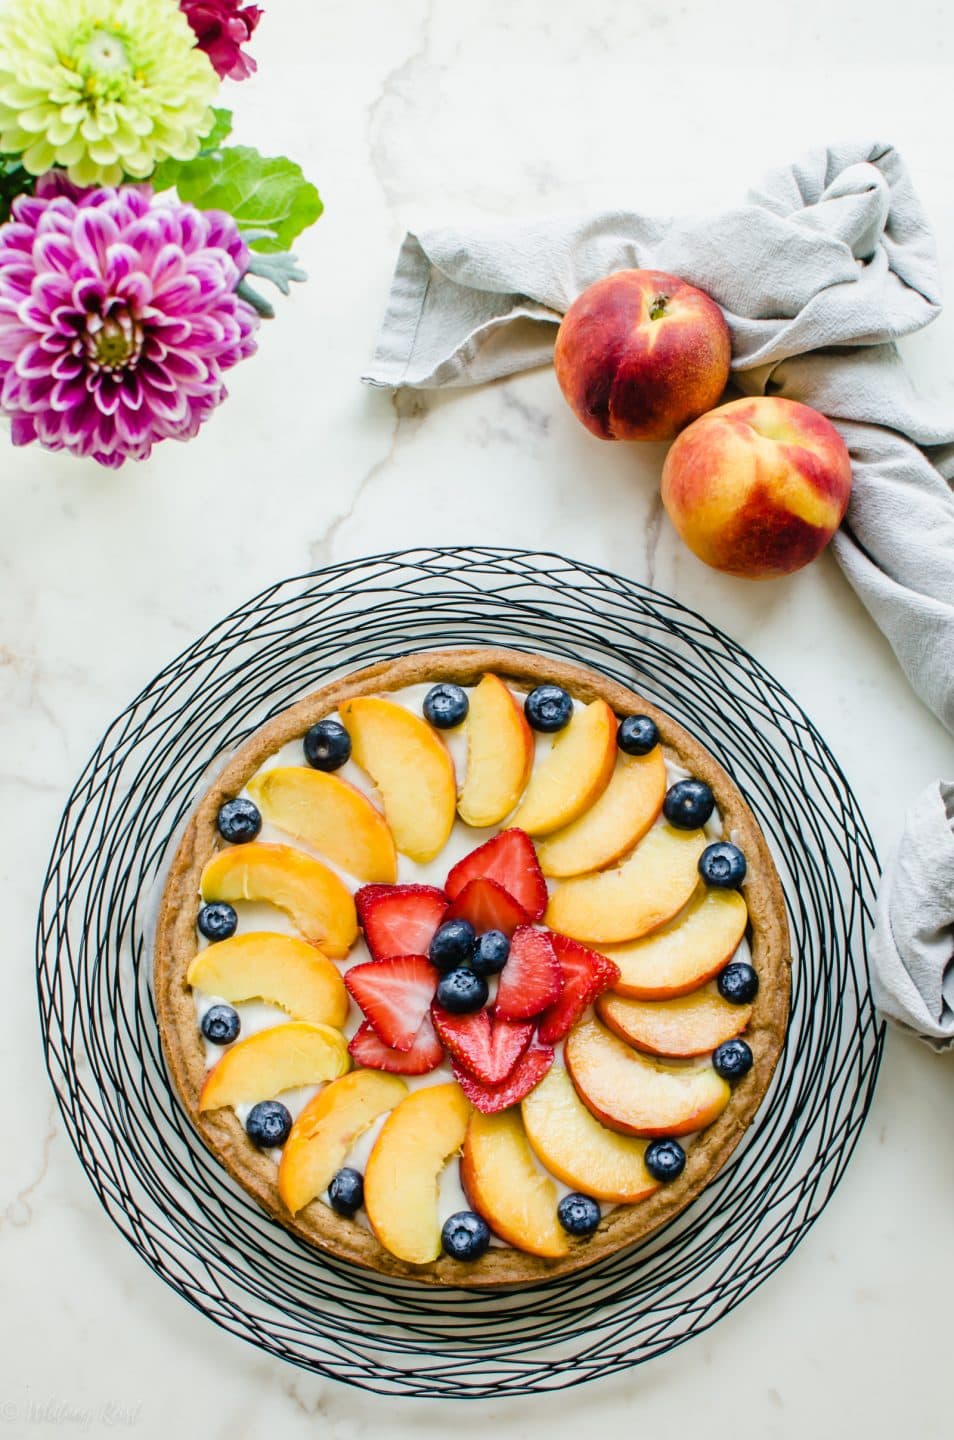 A peach fruit pizza on a wire charger with whole peaches and a vase of flowers on the side.